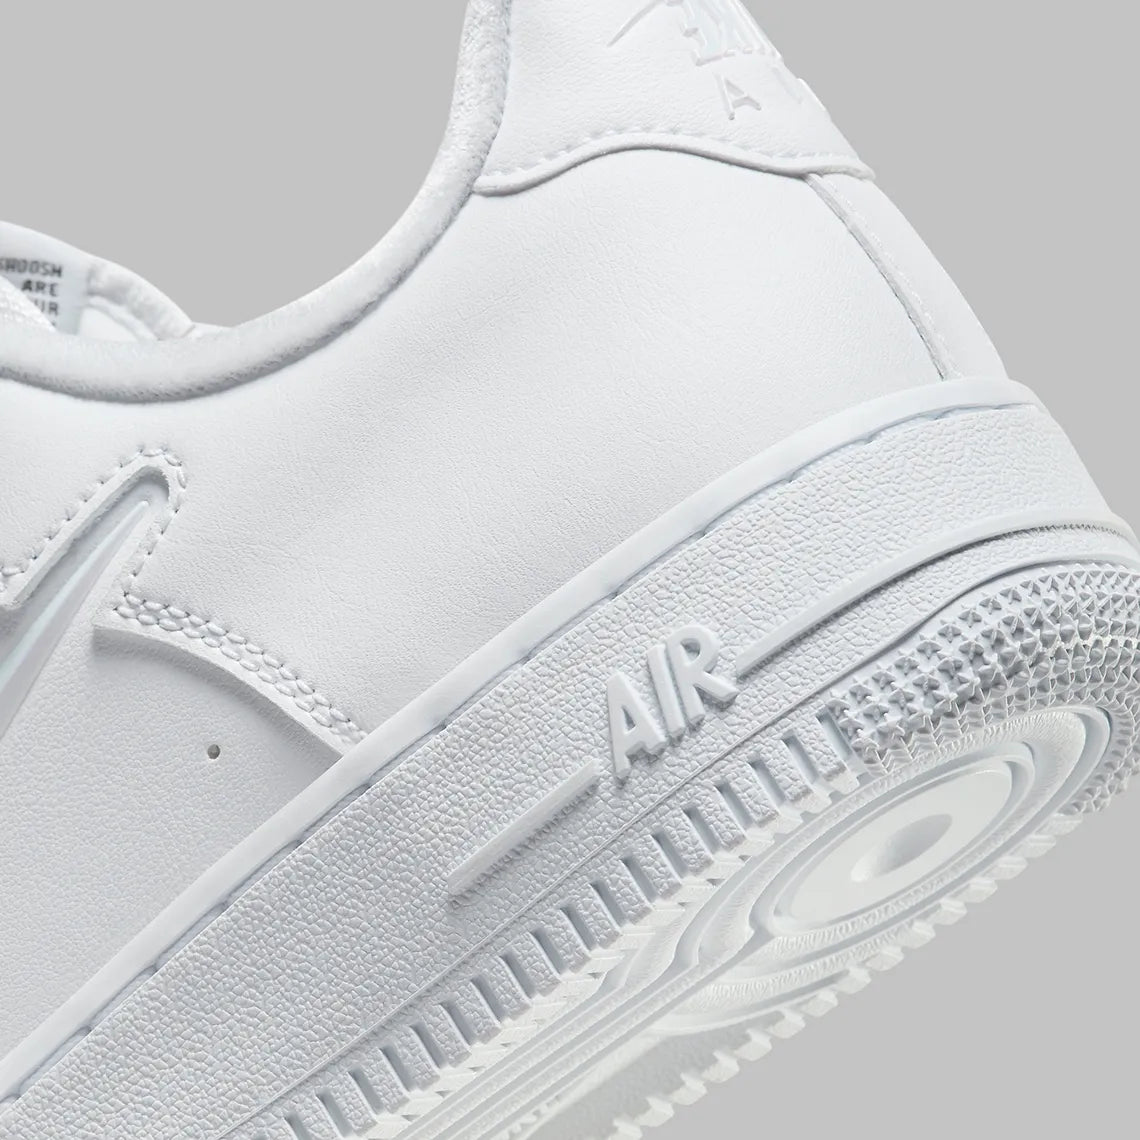 Nike Air Force 1 Low '07 SE Just Do It Triple White